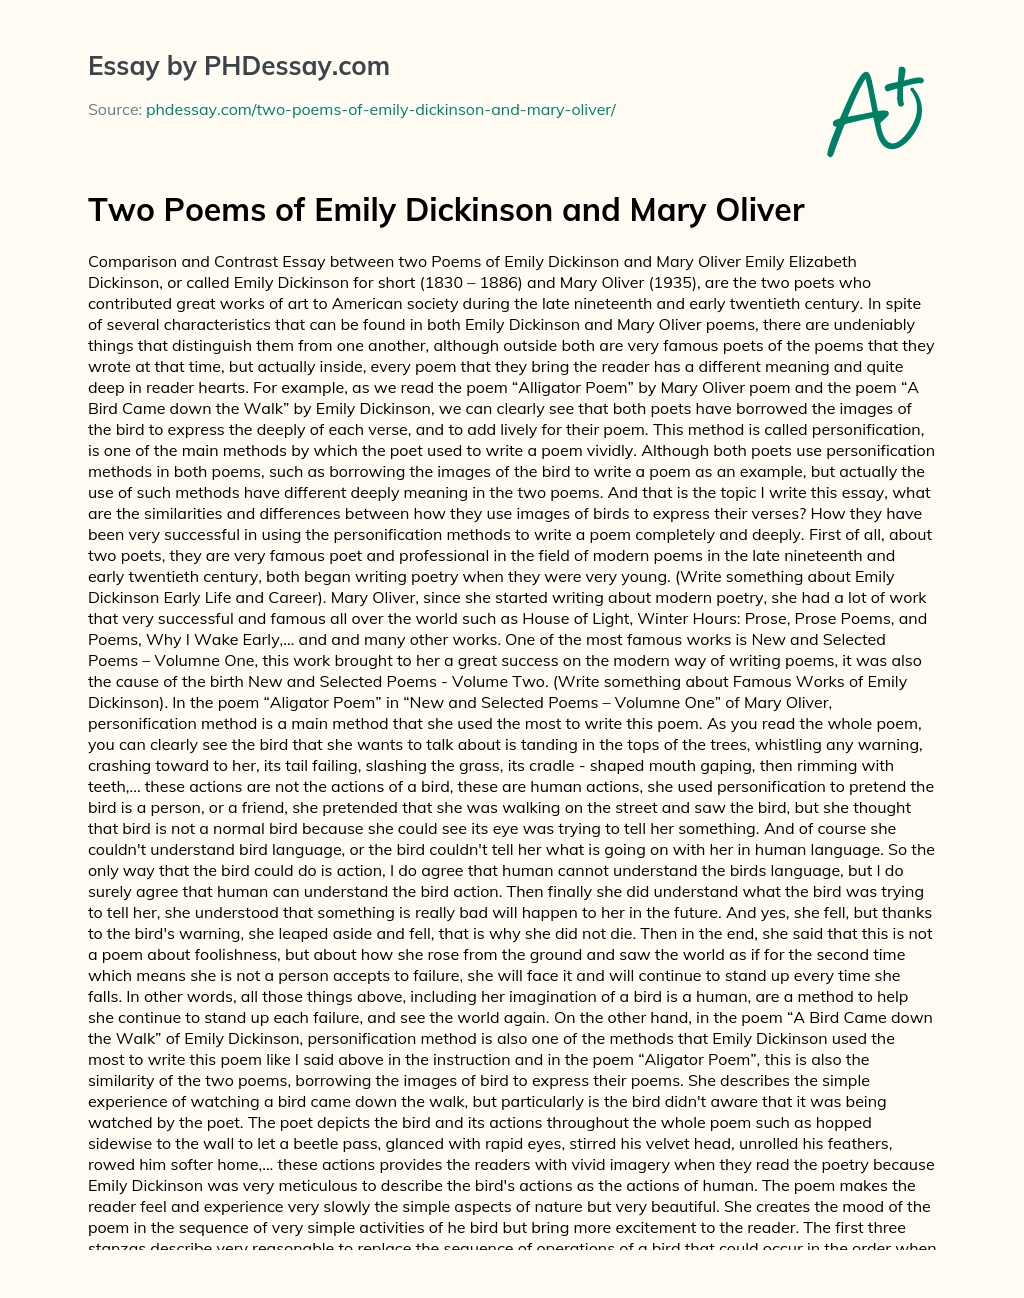 Two Poems of Emily Dickinson and Mary Oliver essay